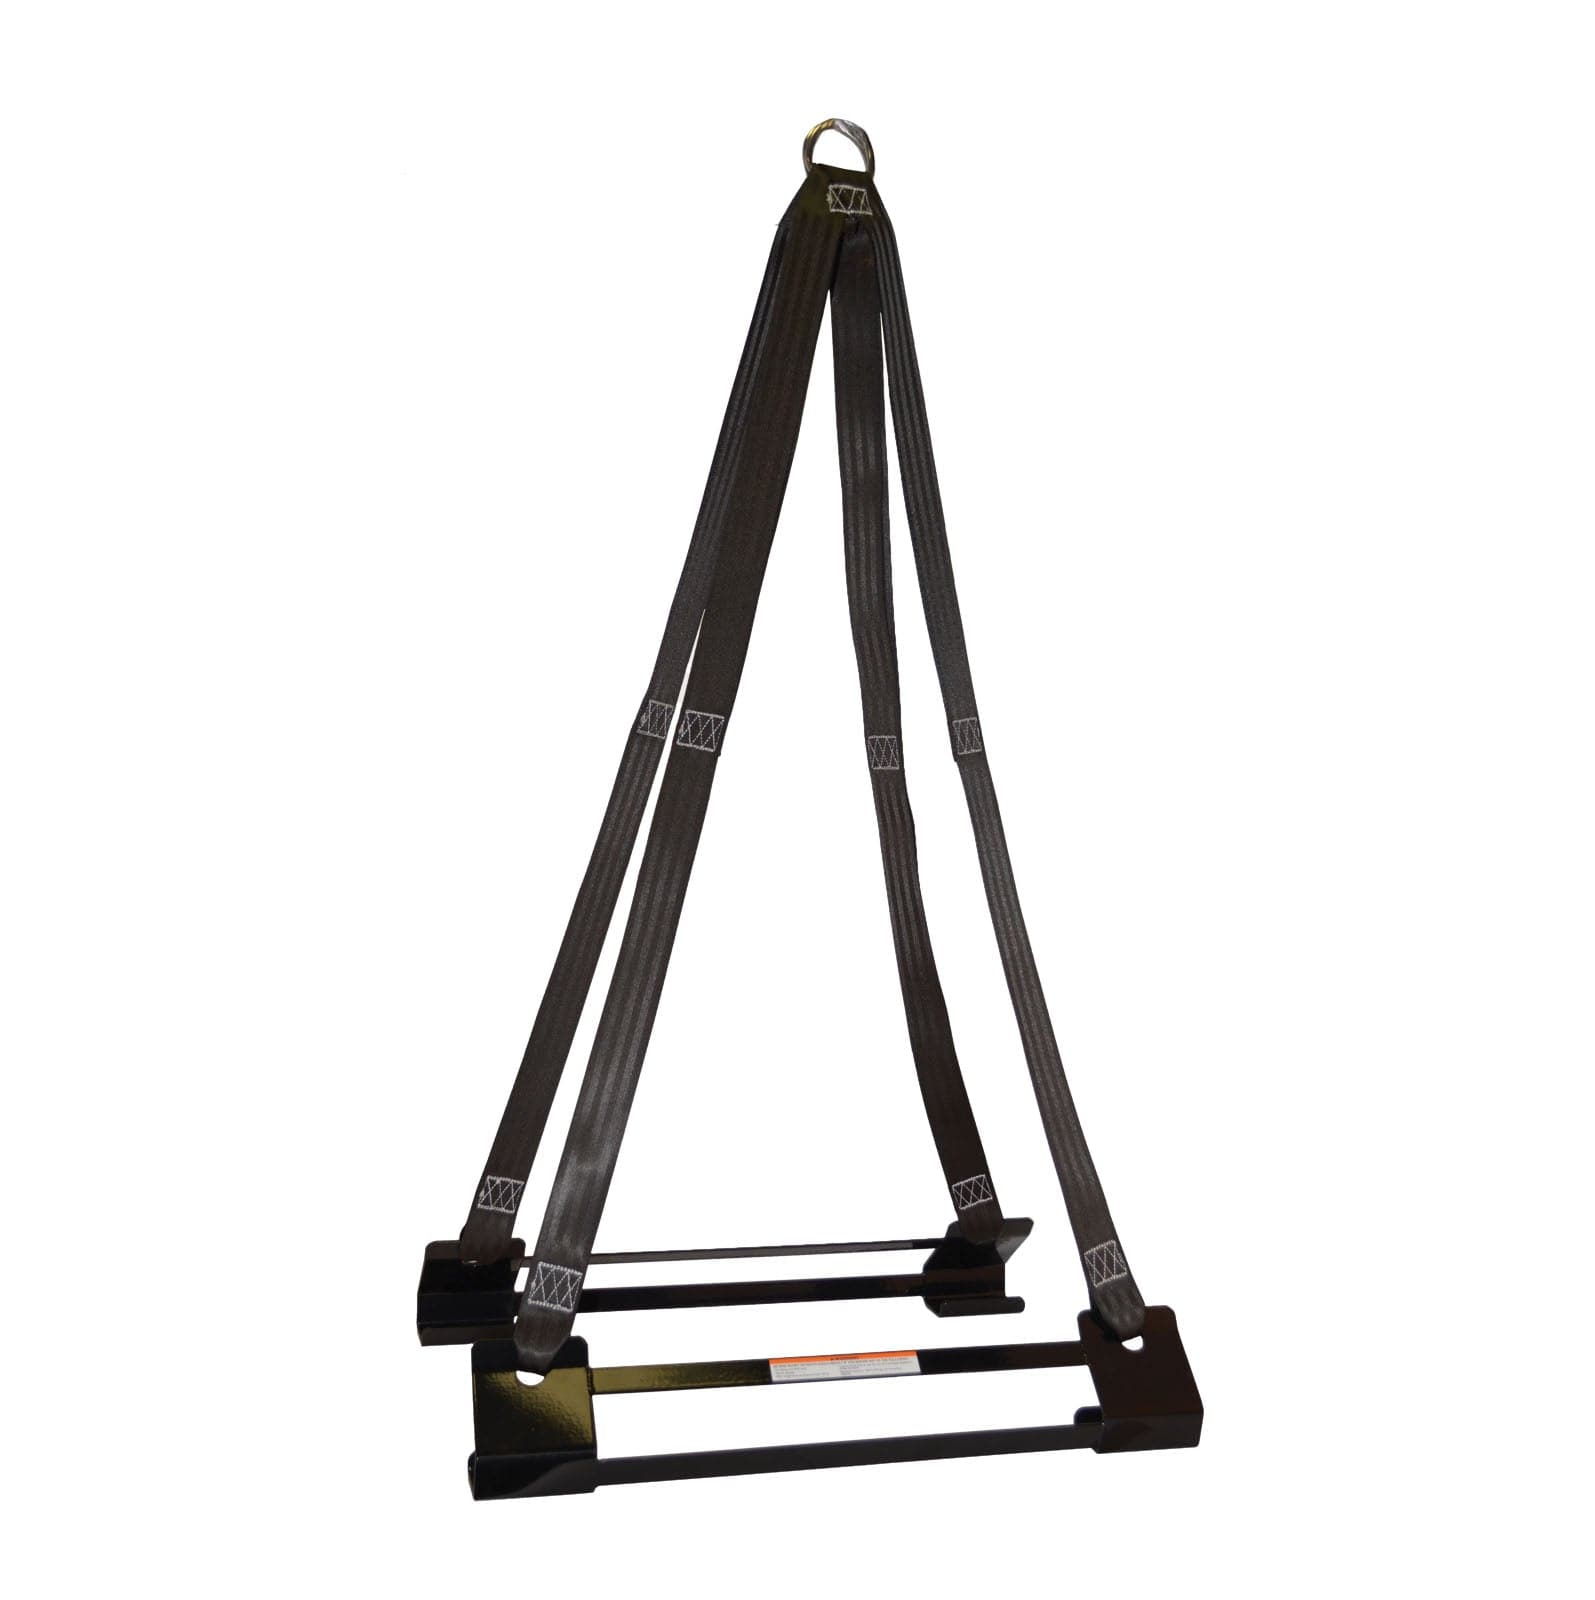 PWC Sling for 2 Strokes - Rated 1600 Lbs